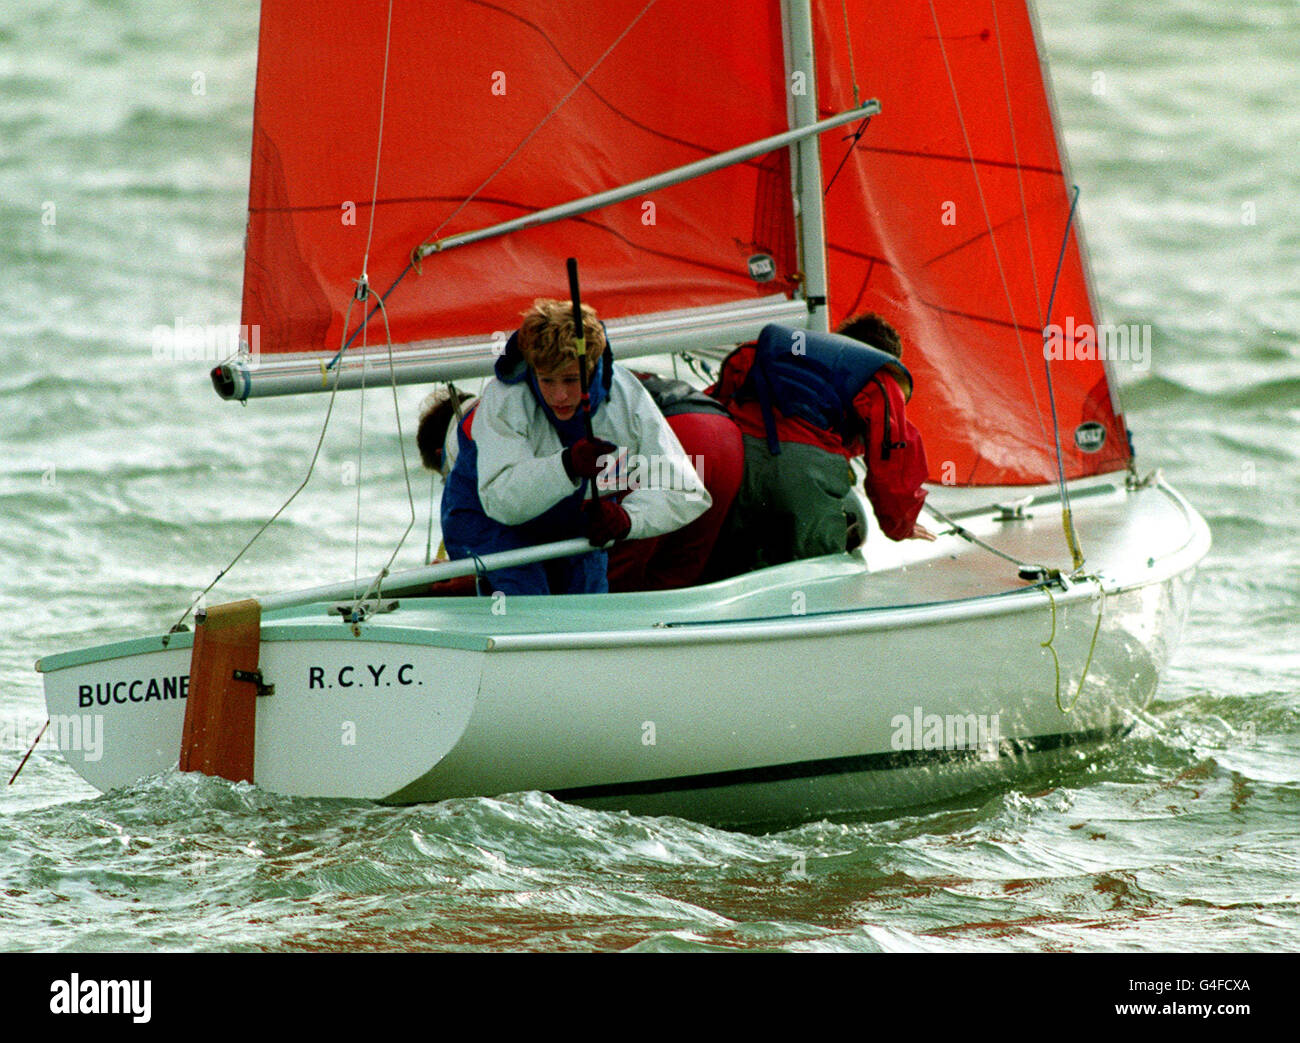 PA News 27/10/90 Master Peter Phillips, son of the Princess Royal, racing at the helm of a Squib Dinghy at Burnham-on-Crouch, Essex, where his mother reopened the Royal Corinthian Yacht Club. Stock Photo